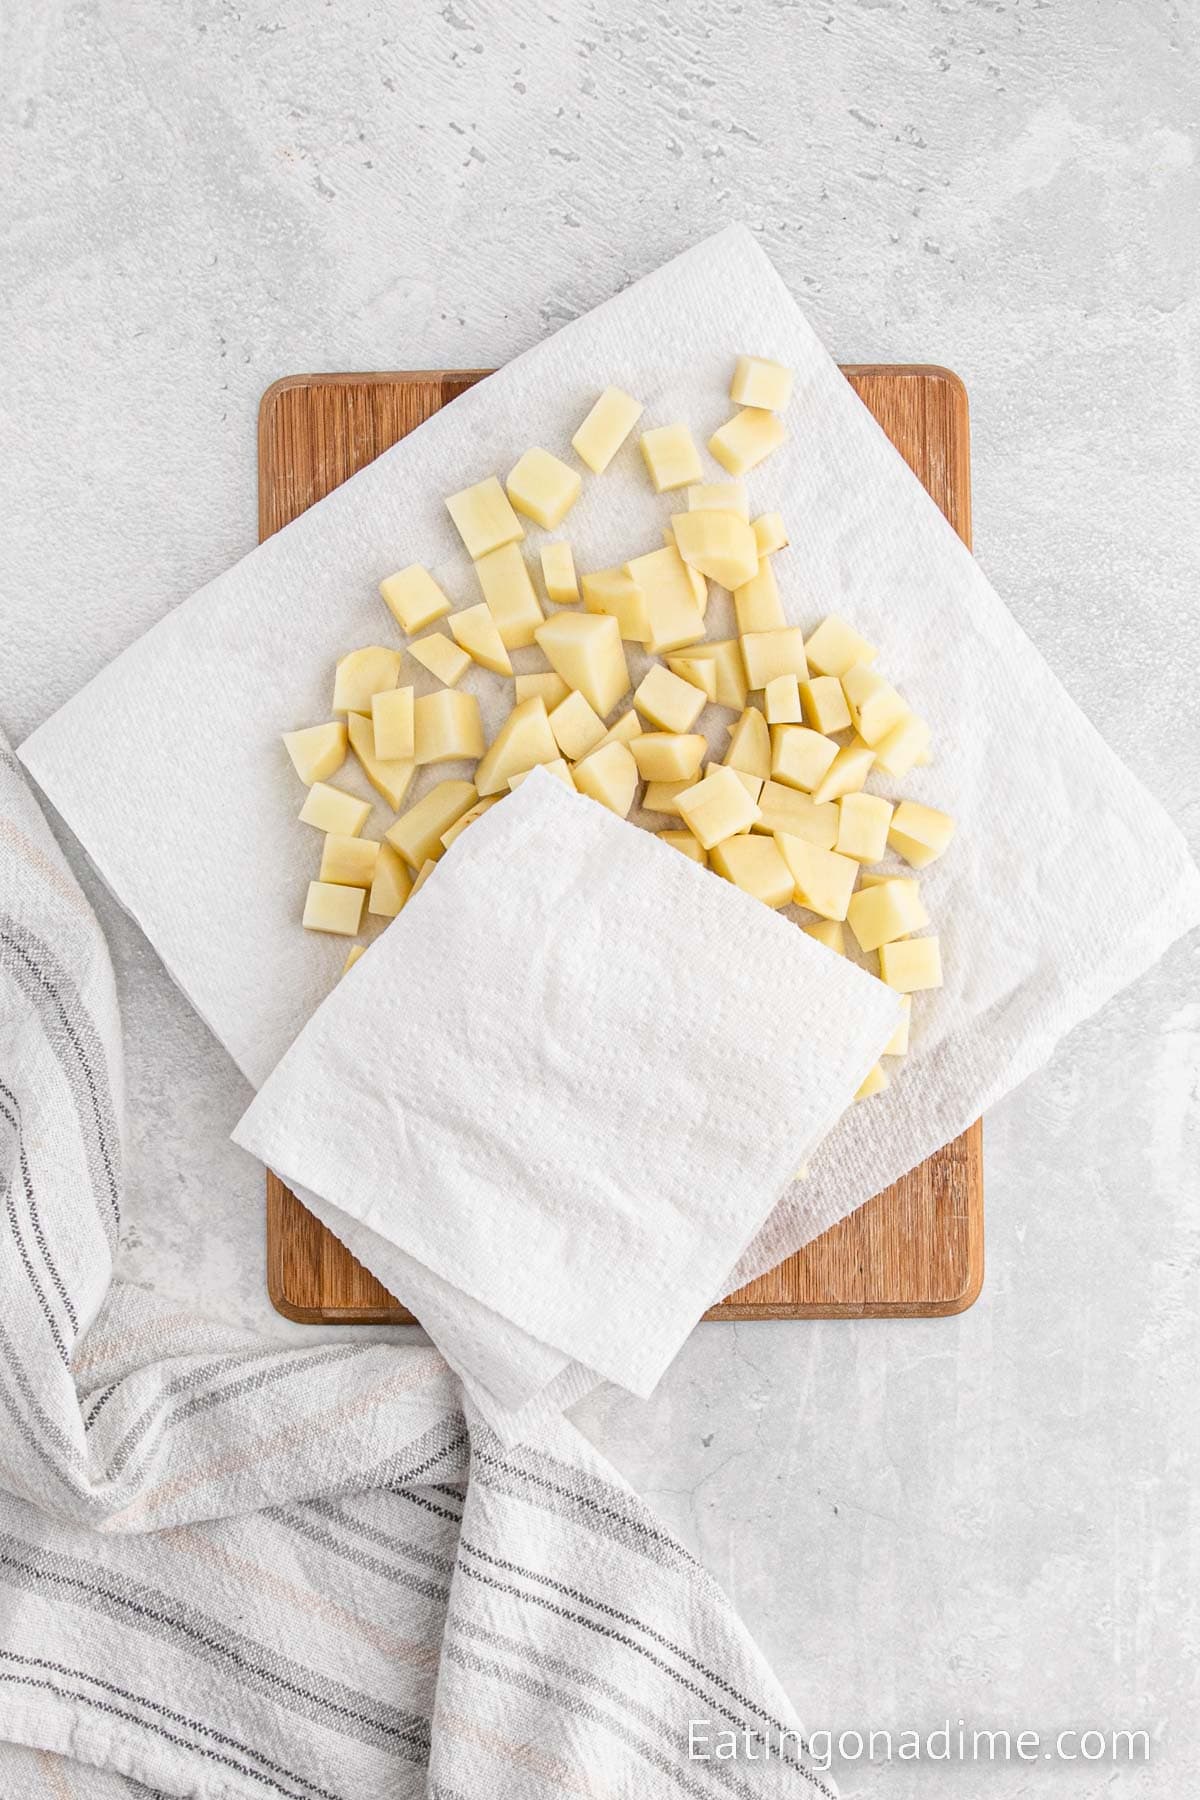 Diced potatoes on cutting board and topped paper towels